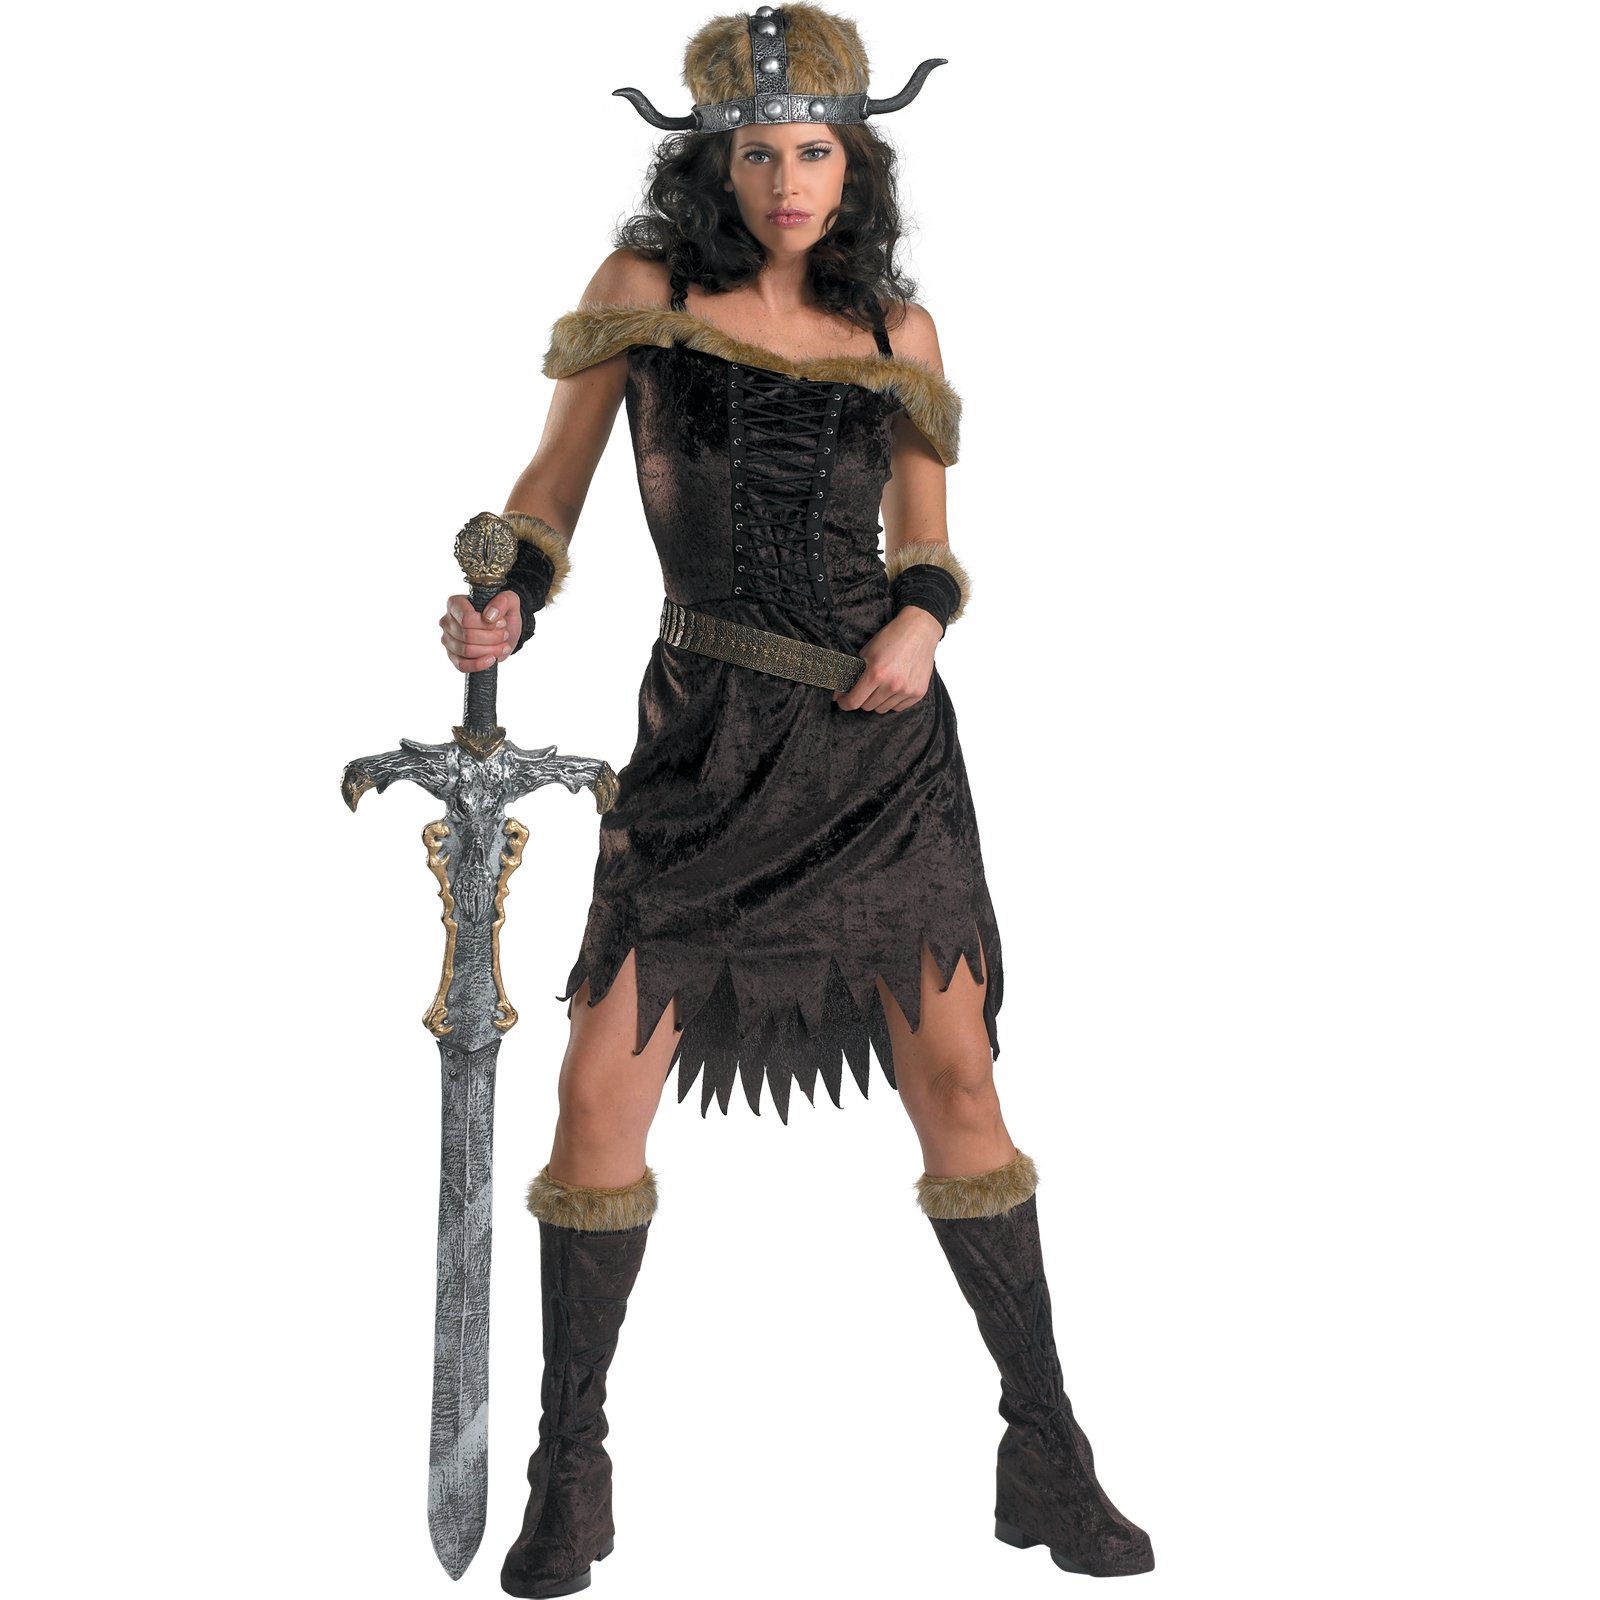 Nordic Babe Adult Costume